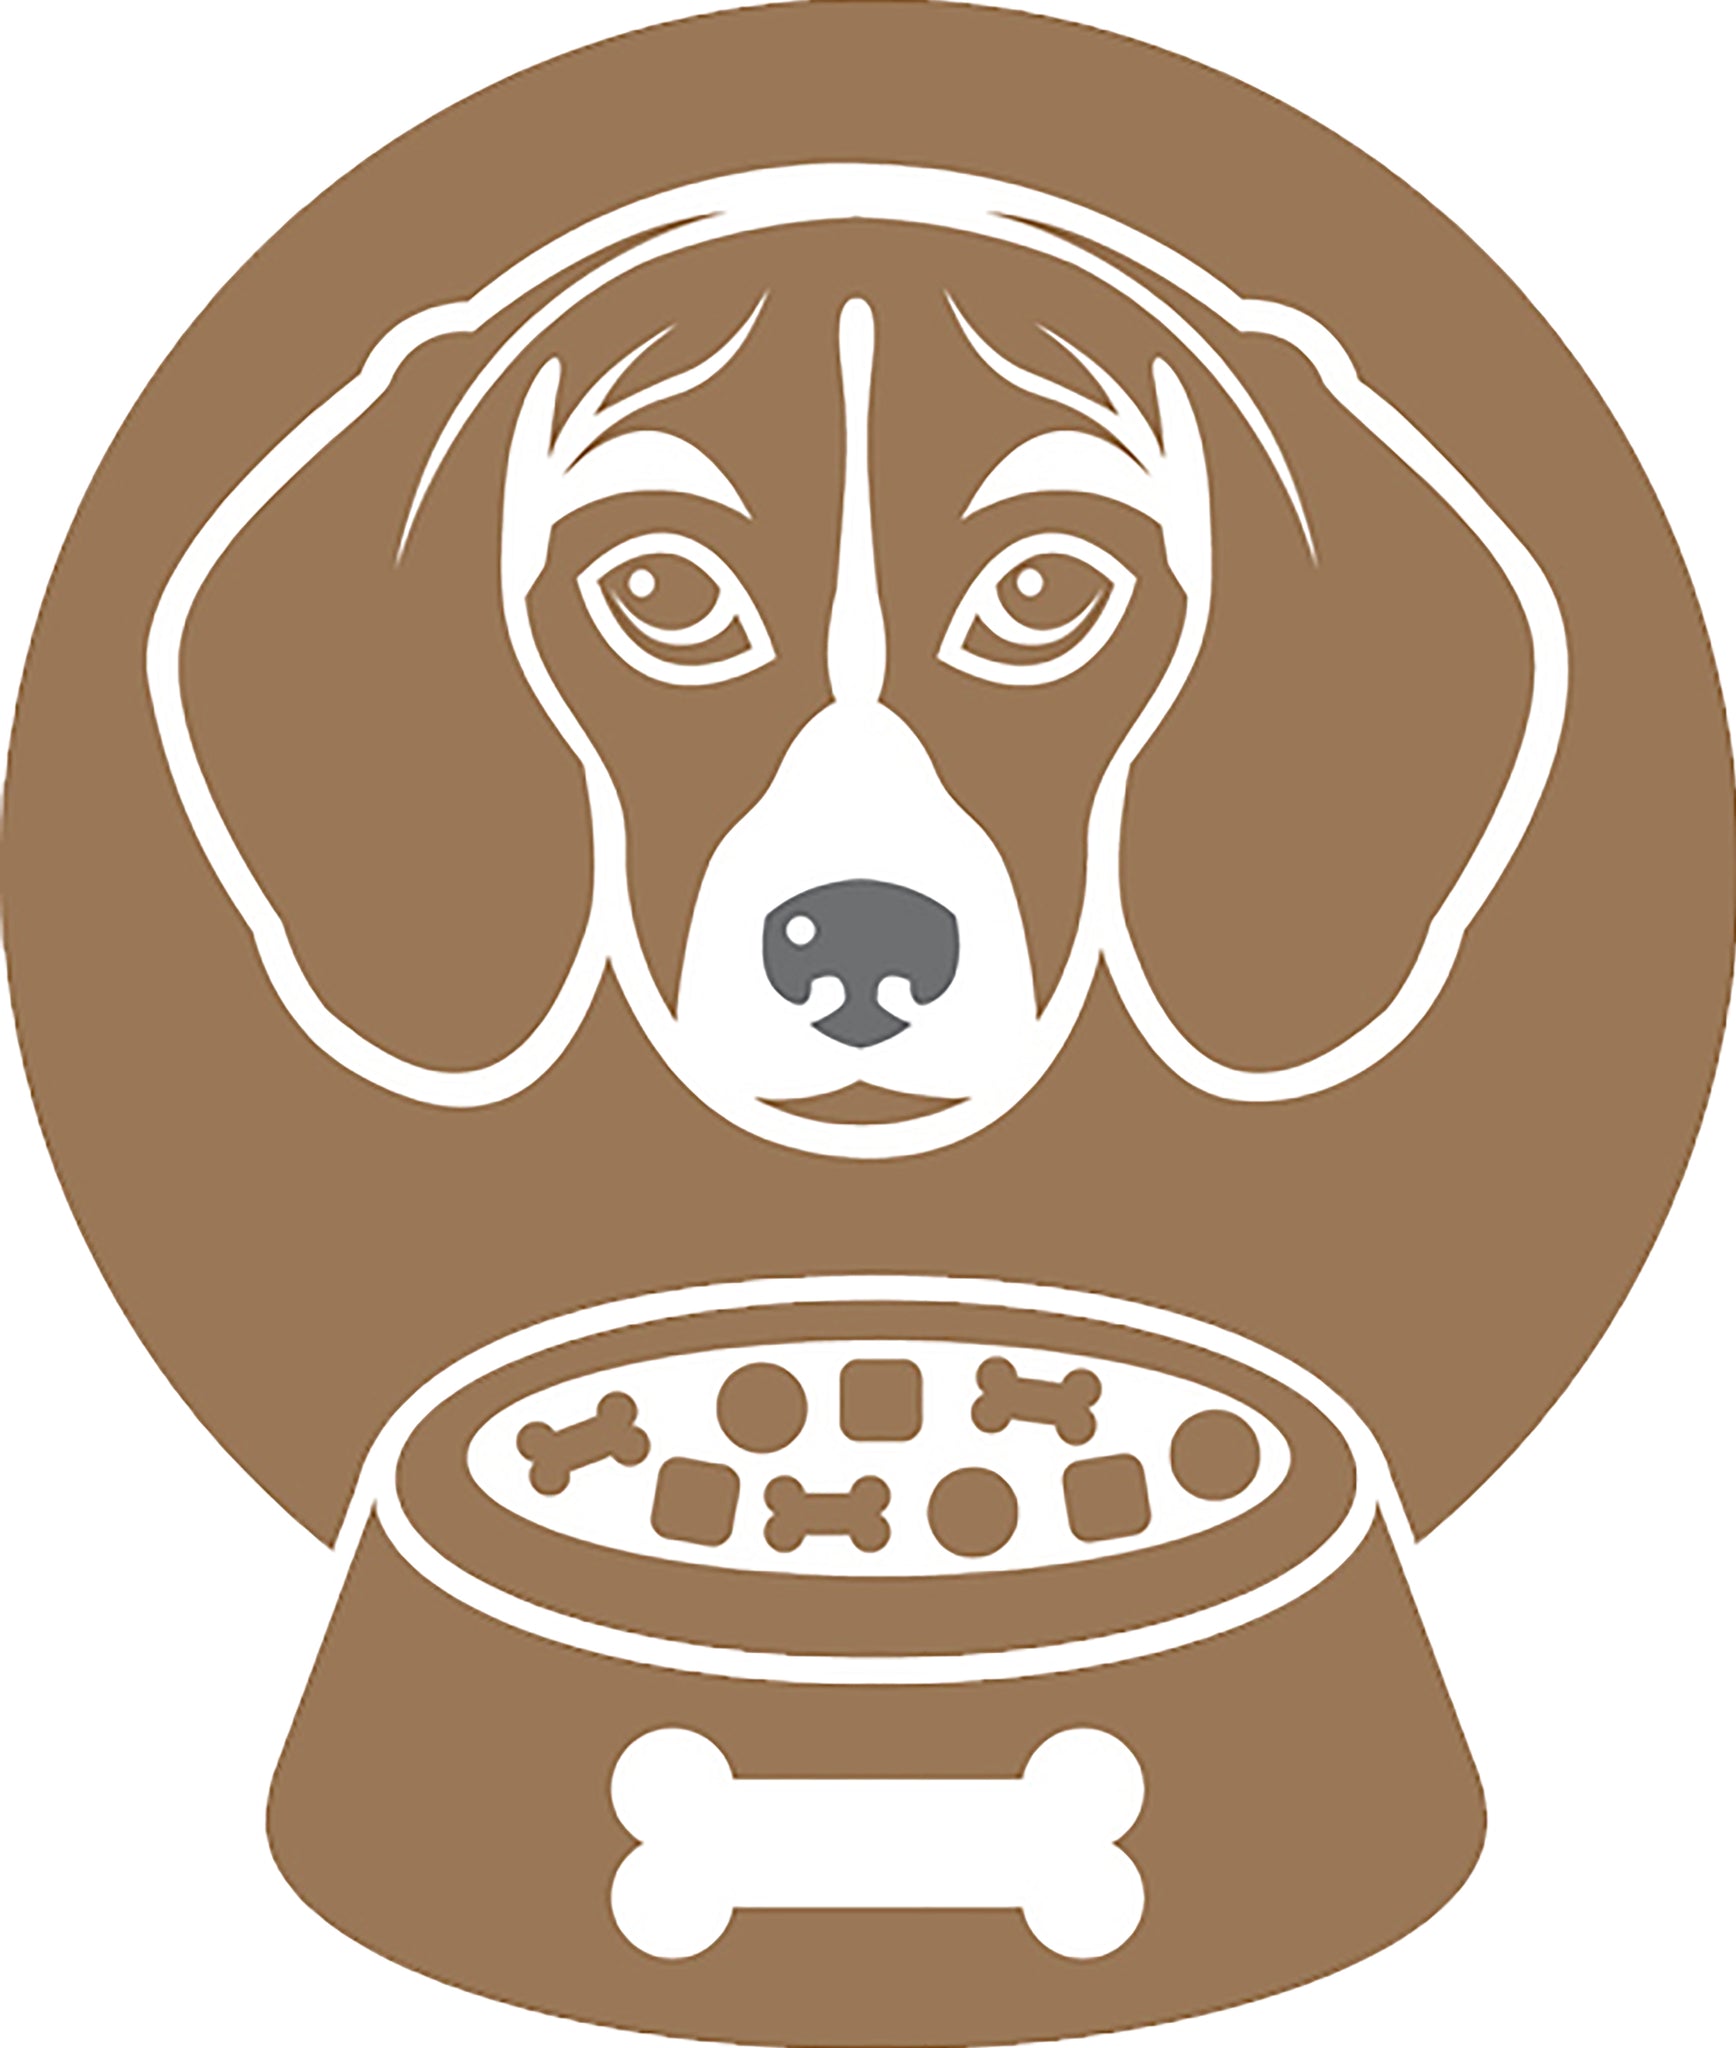 Cute  Simple Puppy Dog and Food Bowl Silhouette - Beagle Vinyl Decal Sticker